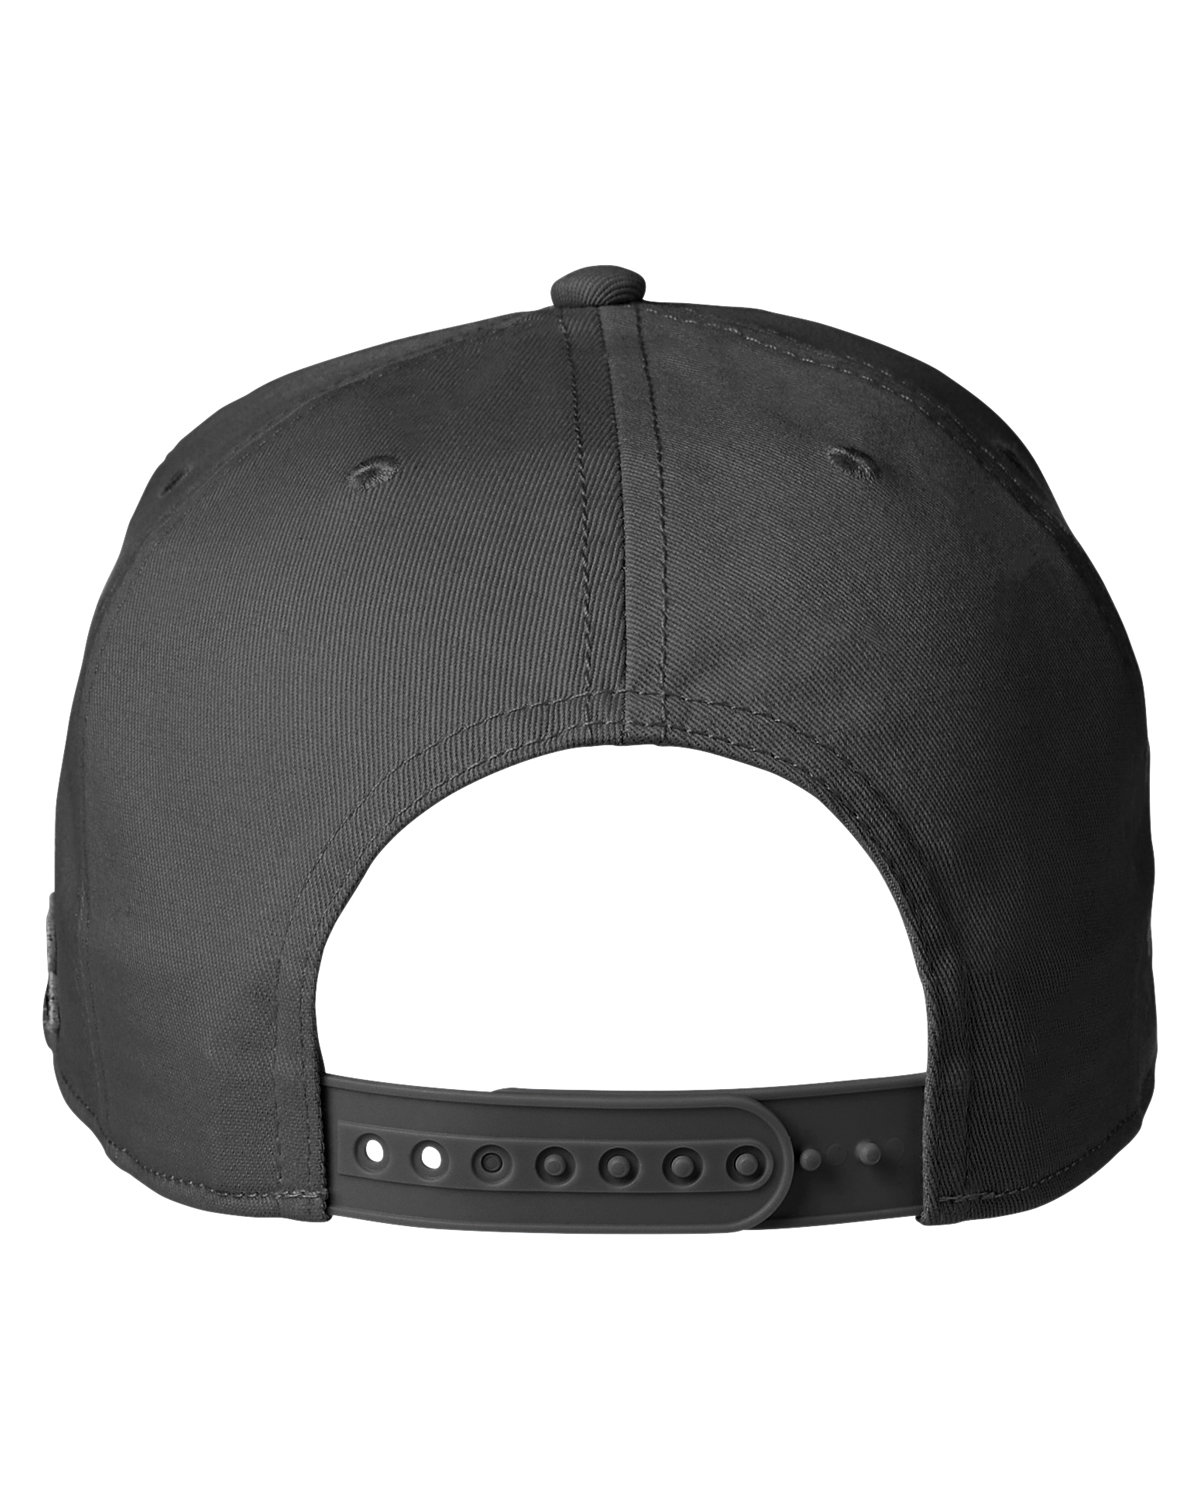 Russell Athletic R Snap Cap | alphabroder